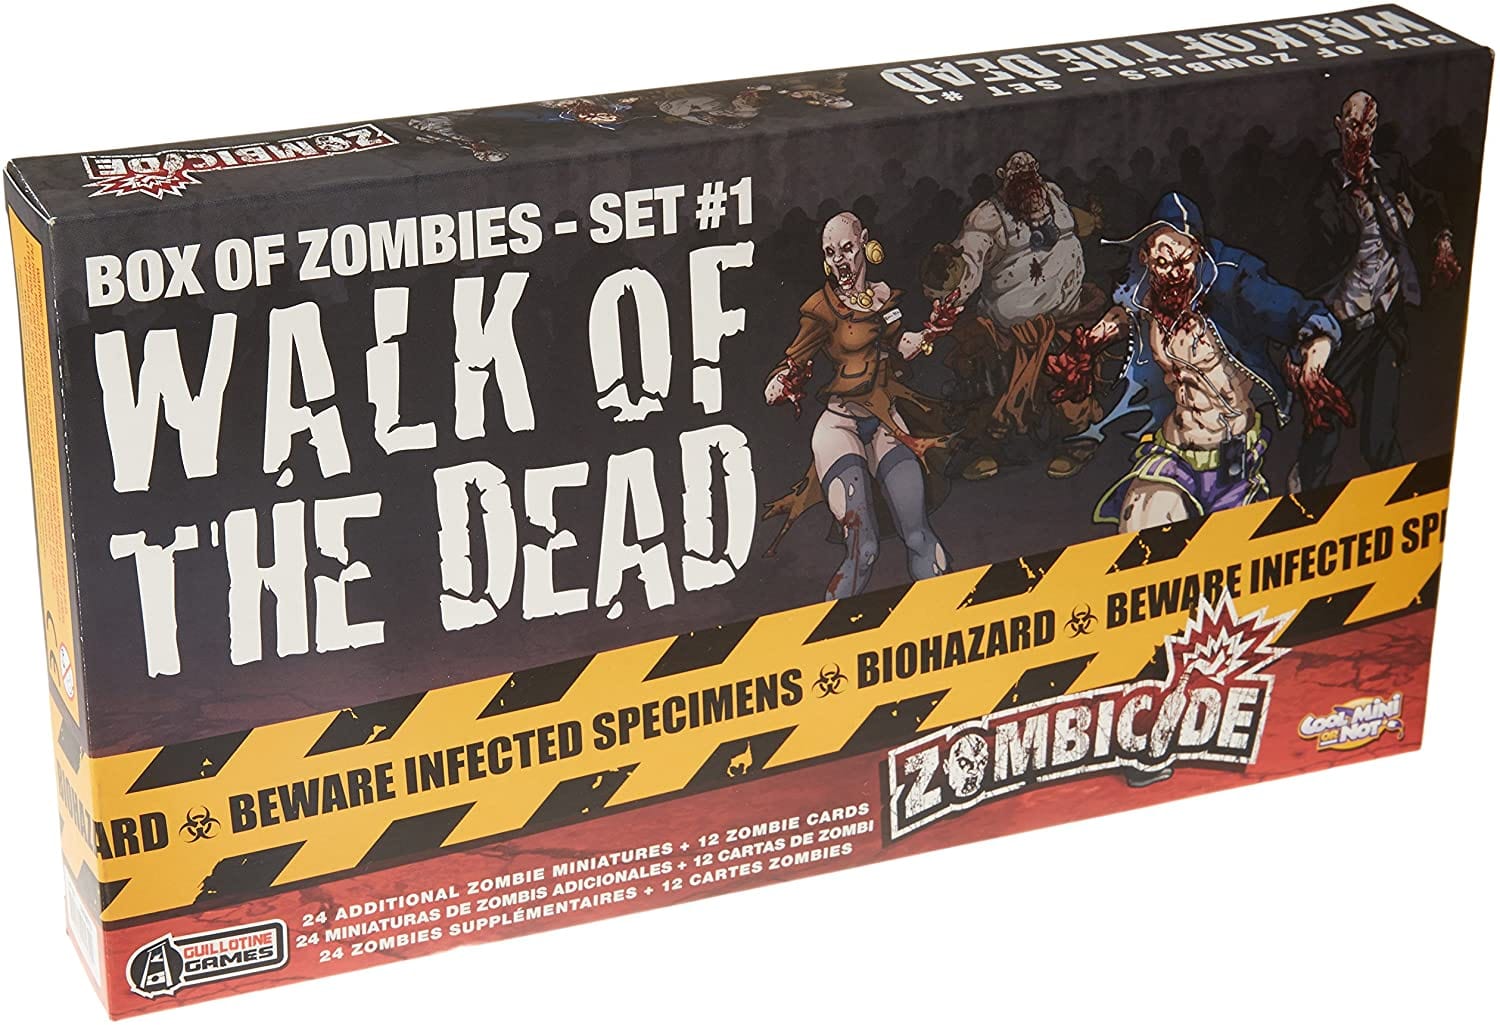 Zombicide: Box of Zombies #1 - Walk of the Dead